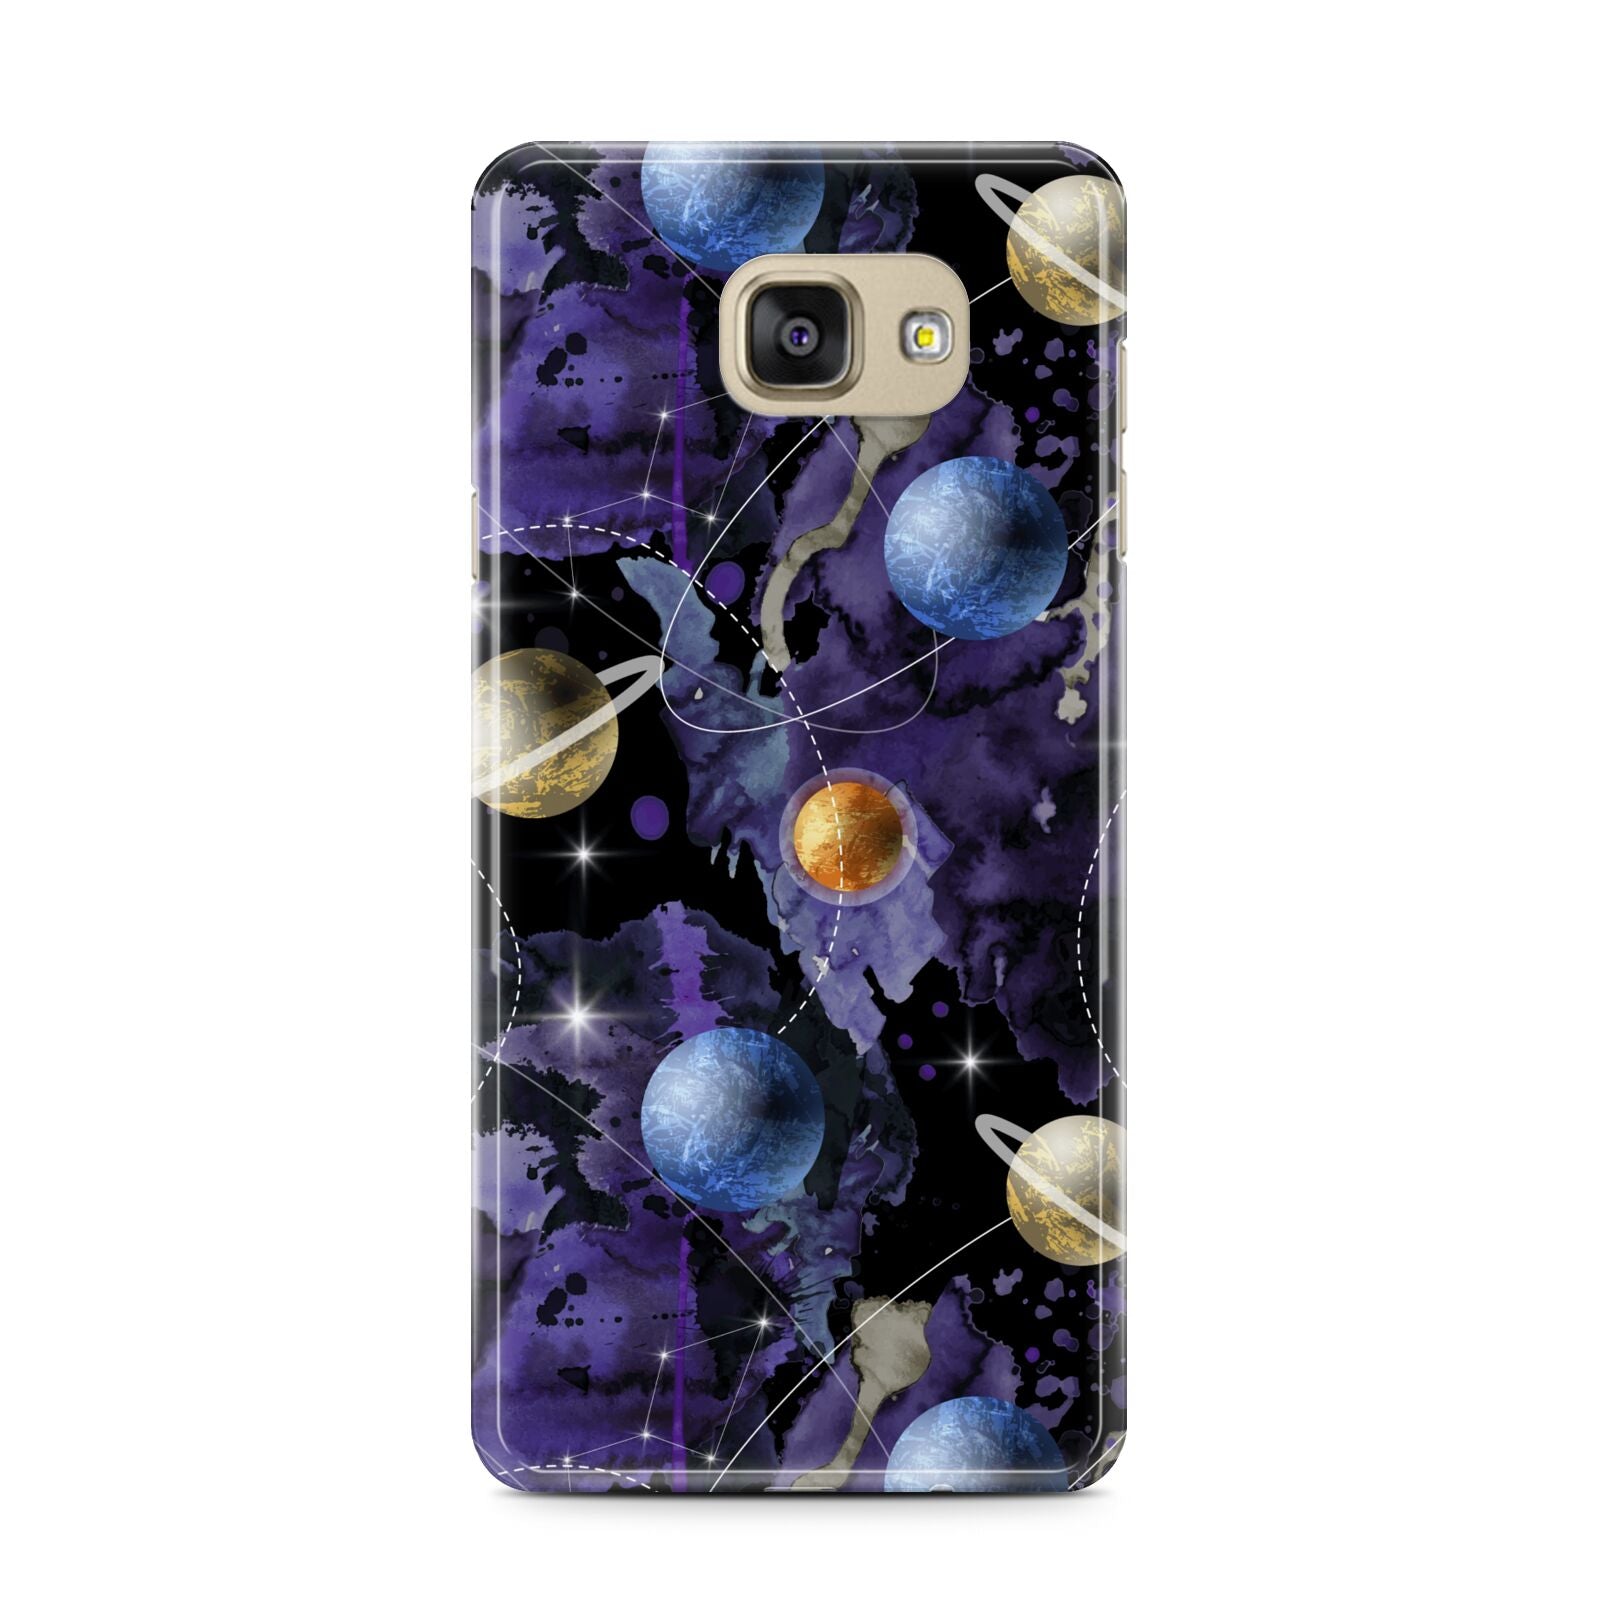 Planet Samsung Galaxy A7 2016 Case on gold phone